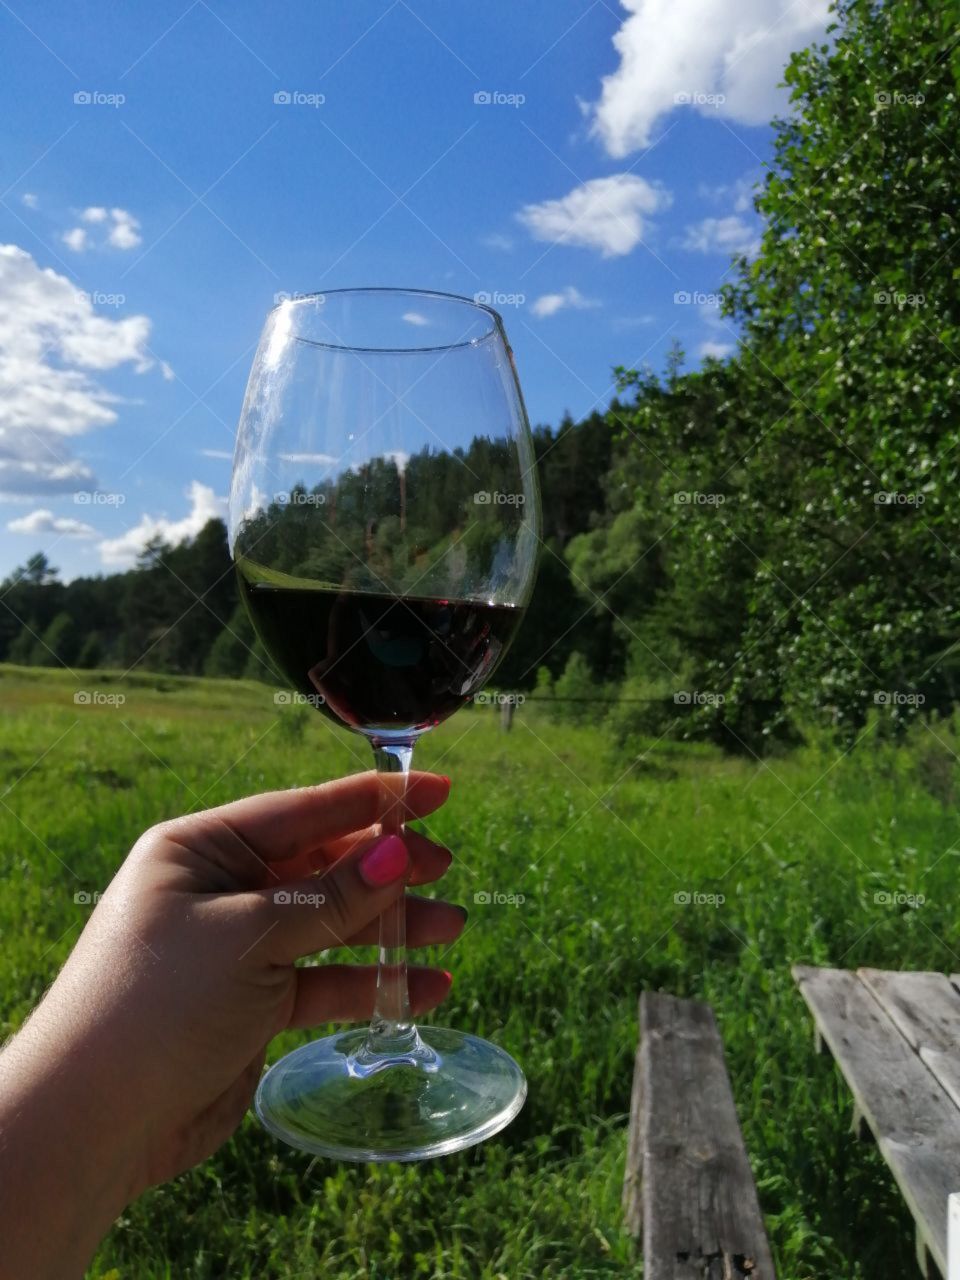 a glass of red wine in hand against the background of green forest and grass and blue sky